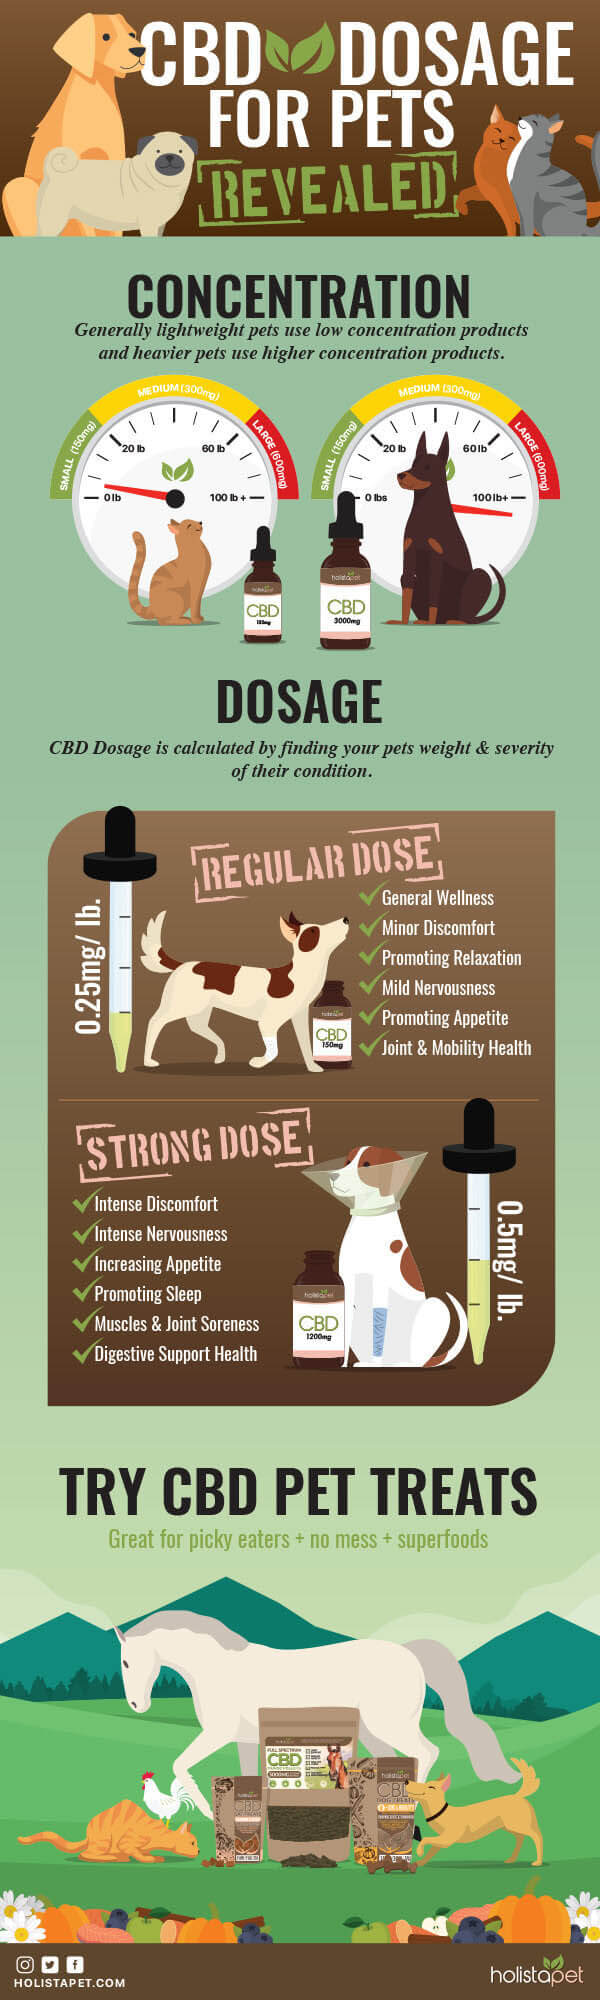 HOW MUCH CBD OIL TO GIVE TO DOGS? CBD OIL DOZING INSTRUCTIONS & CALCULATOR